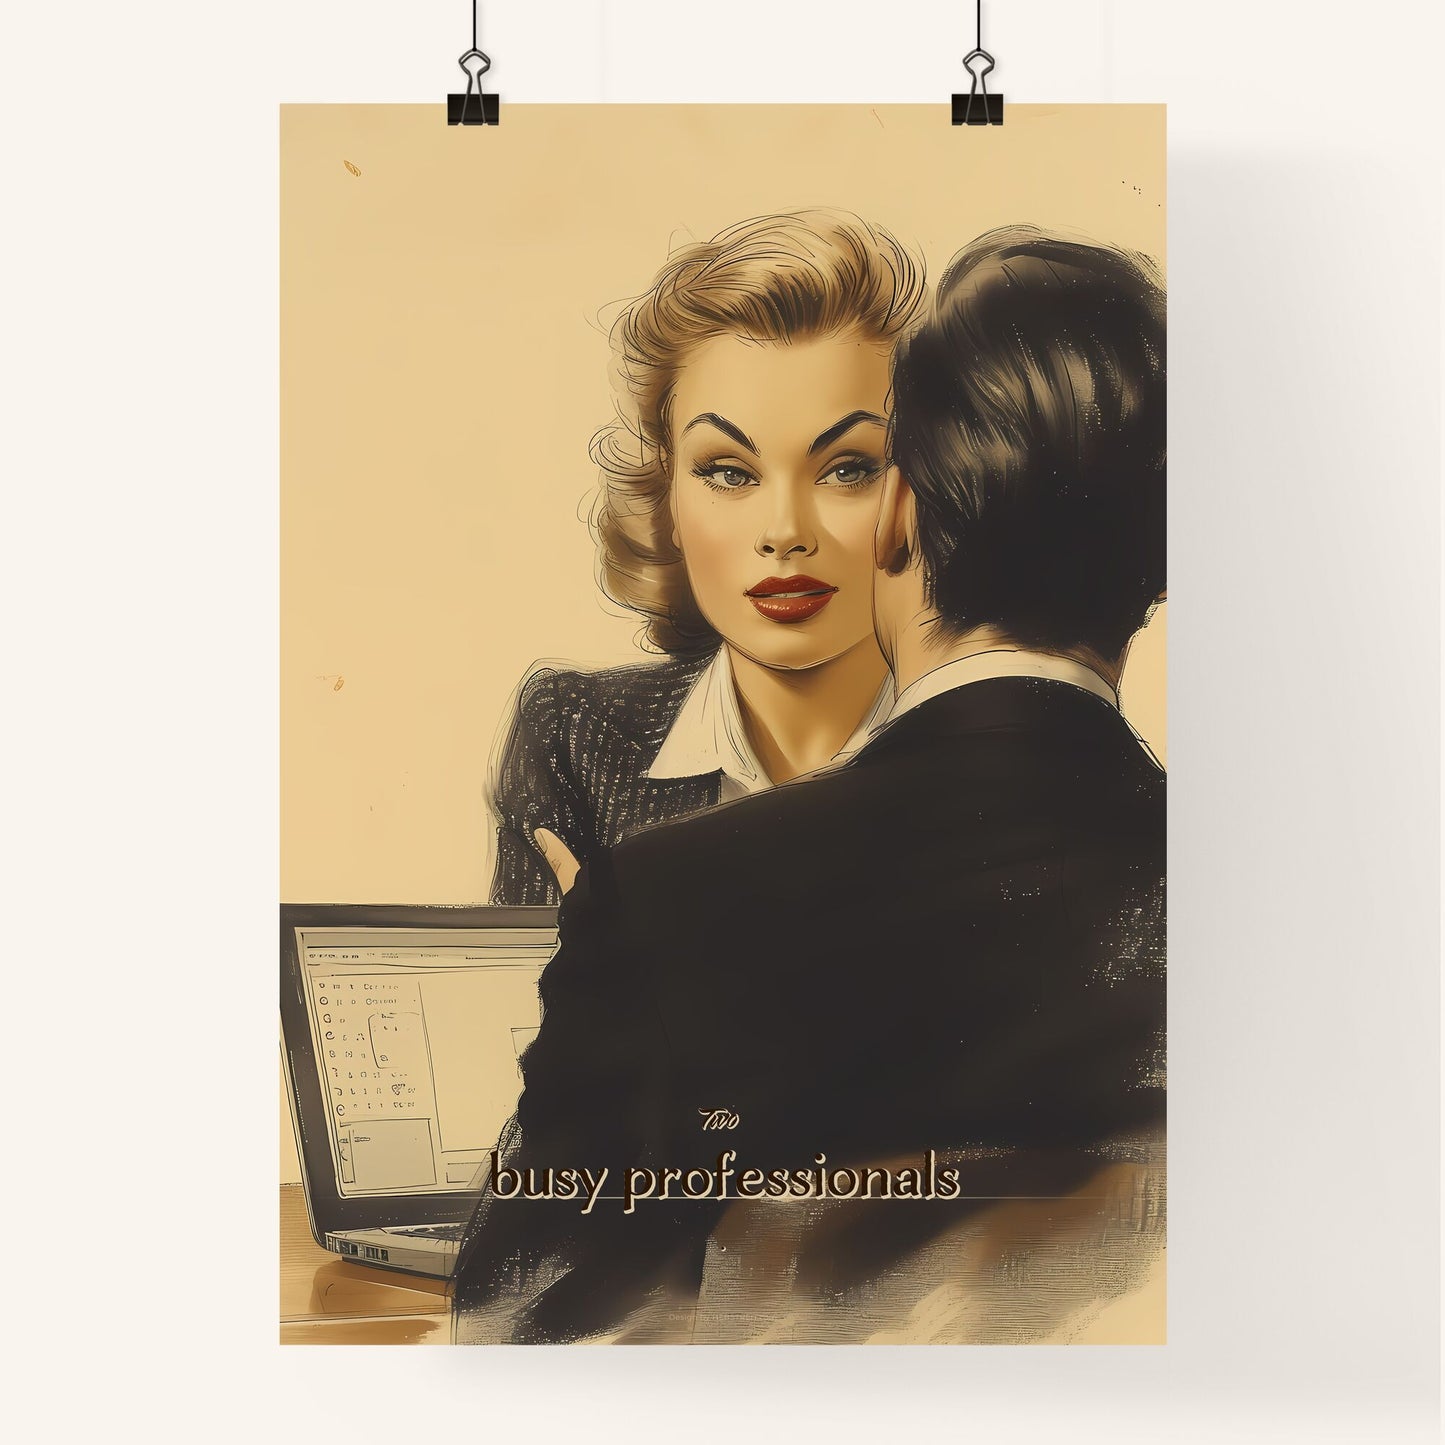 Two, busy professionals, A Poster of a man and woman sitting at a table Default Title